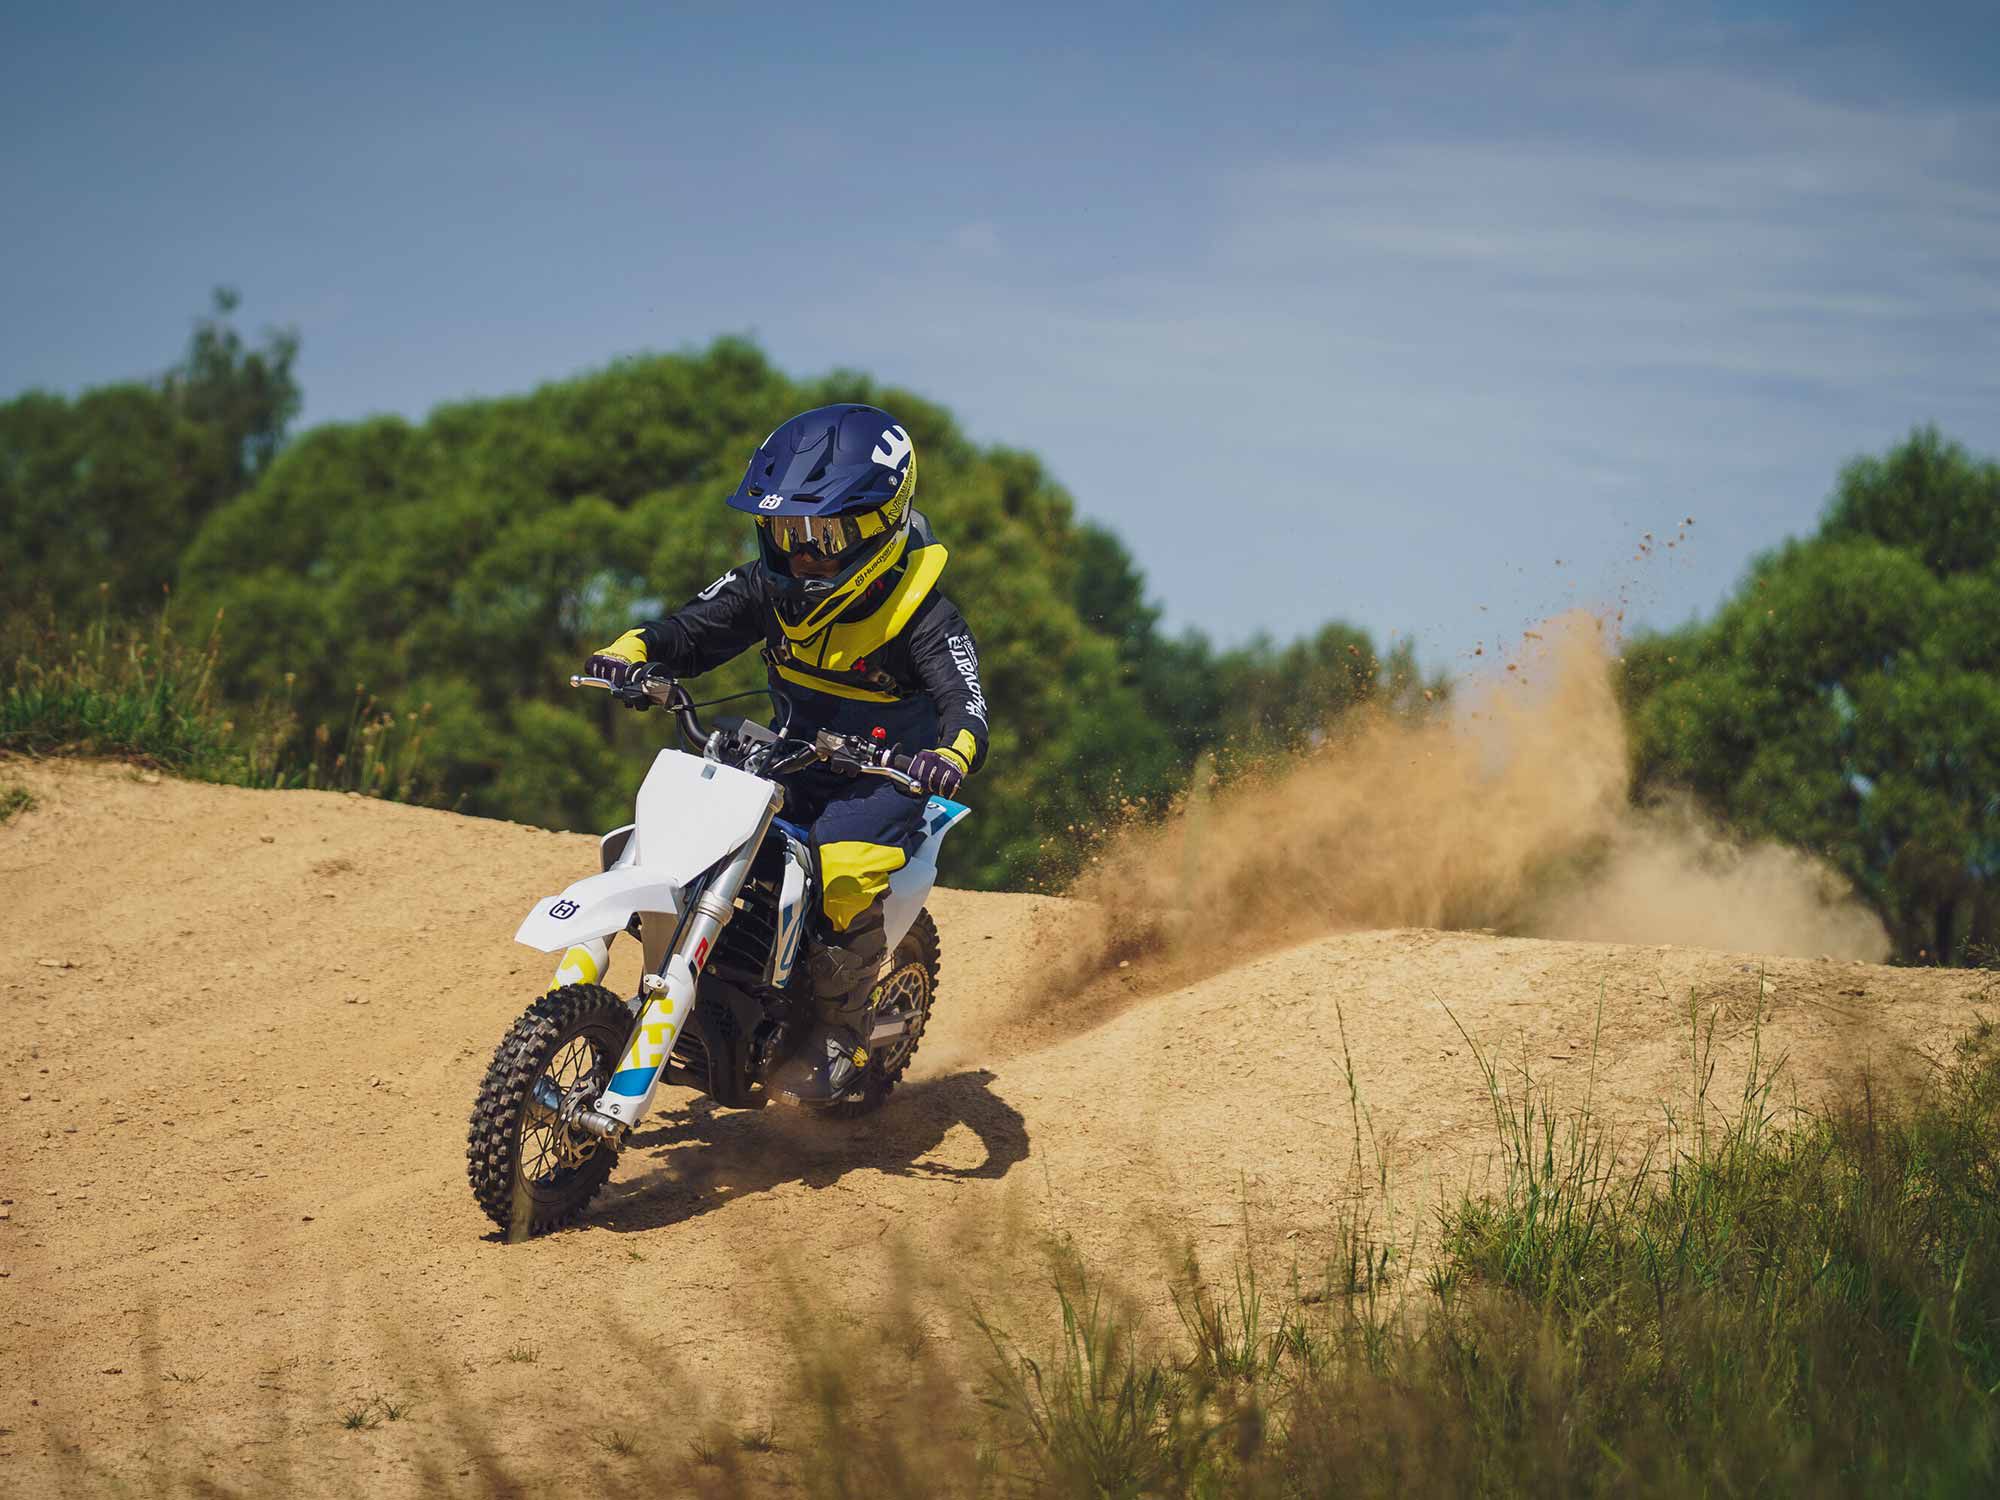 The 2023 Husqvarna EE 3 electric motorcycle for kids will start at $5,049.